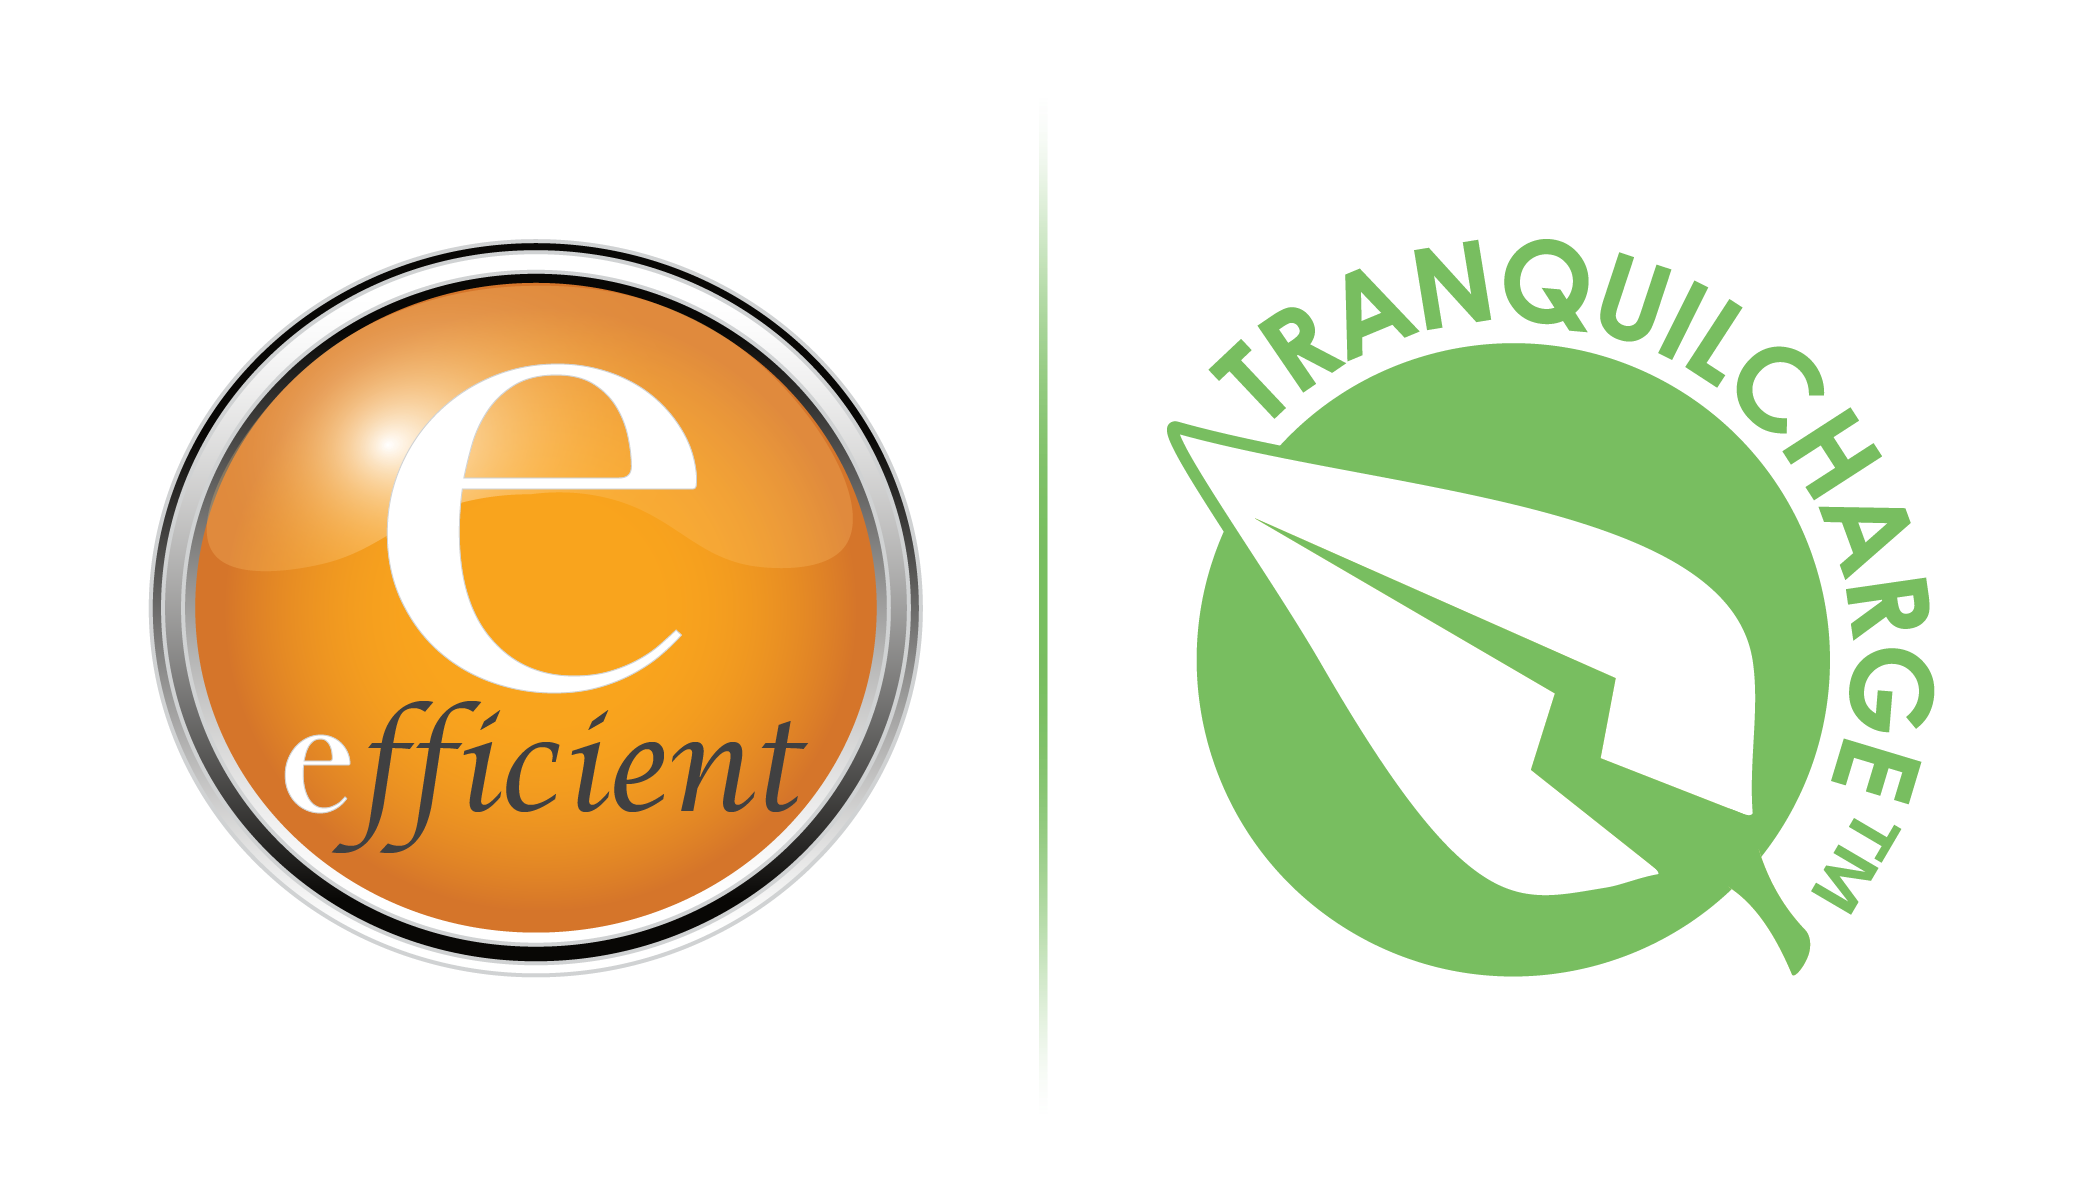 tranquilcharge logo